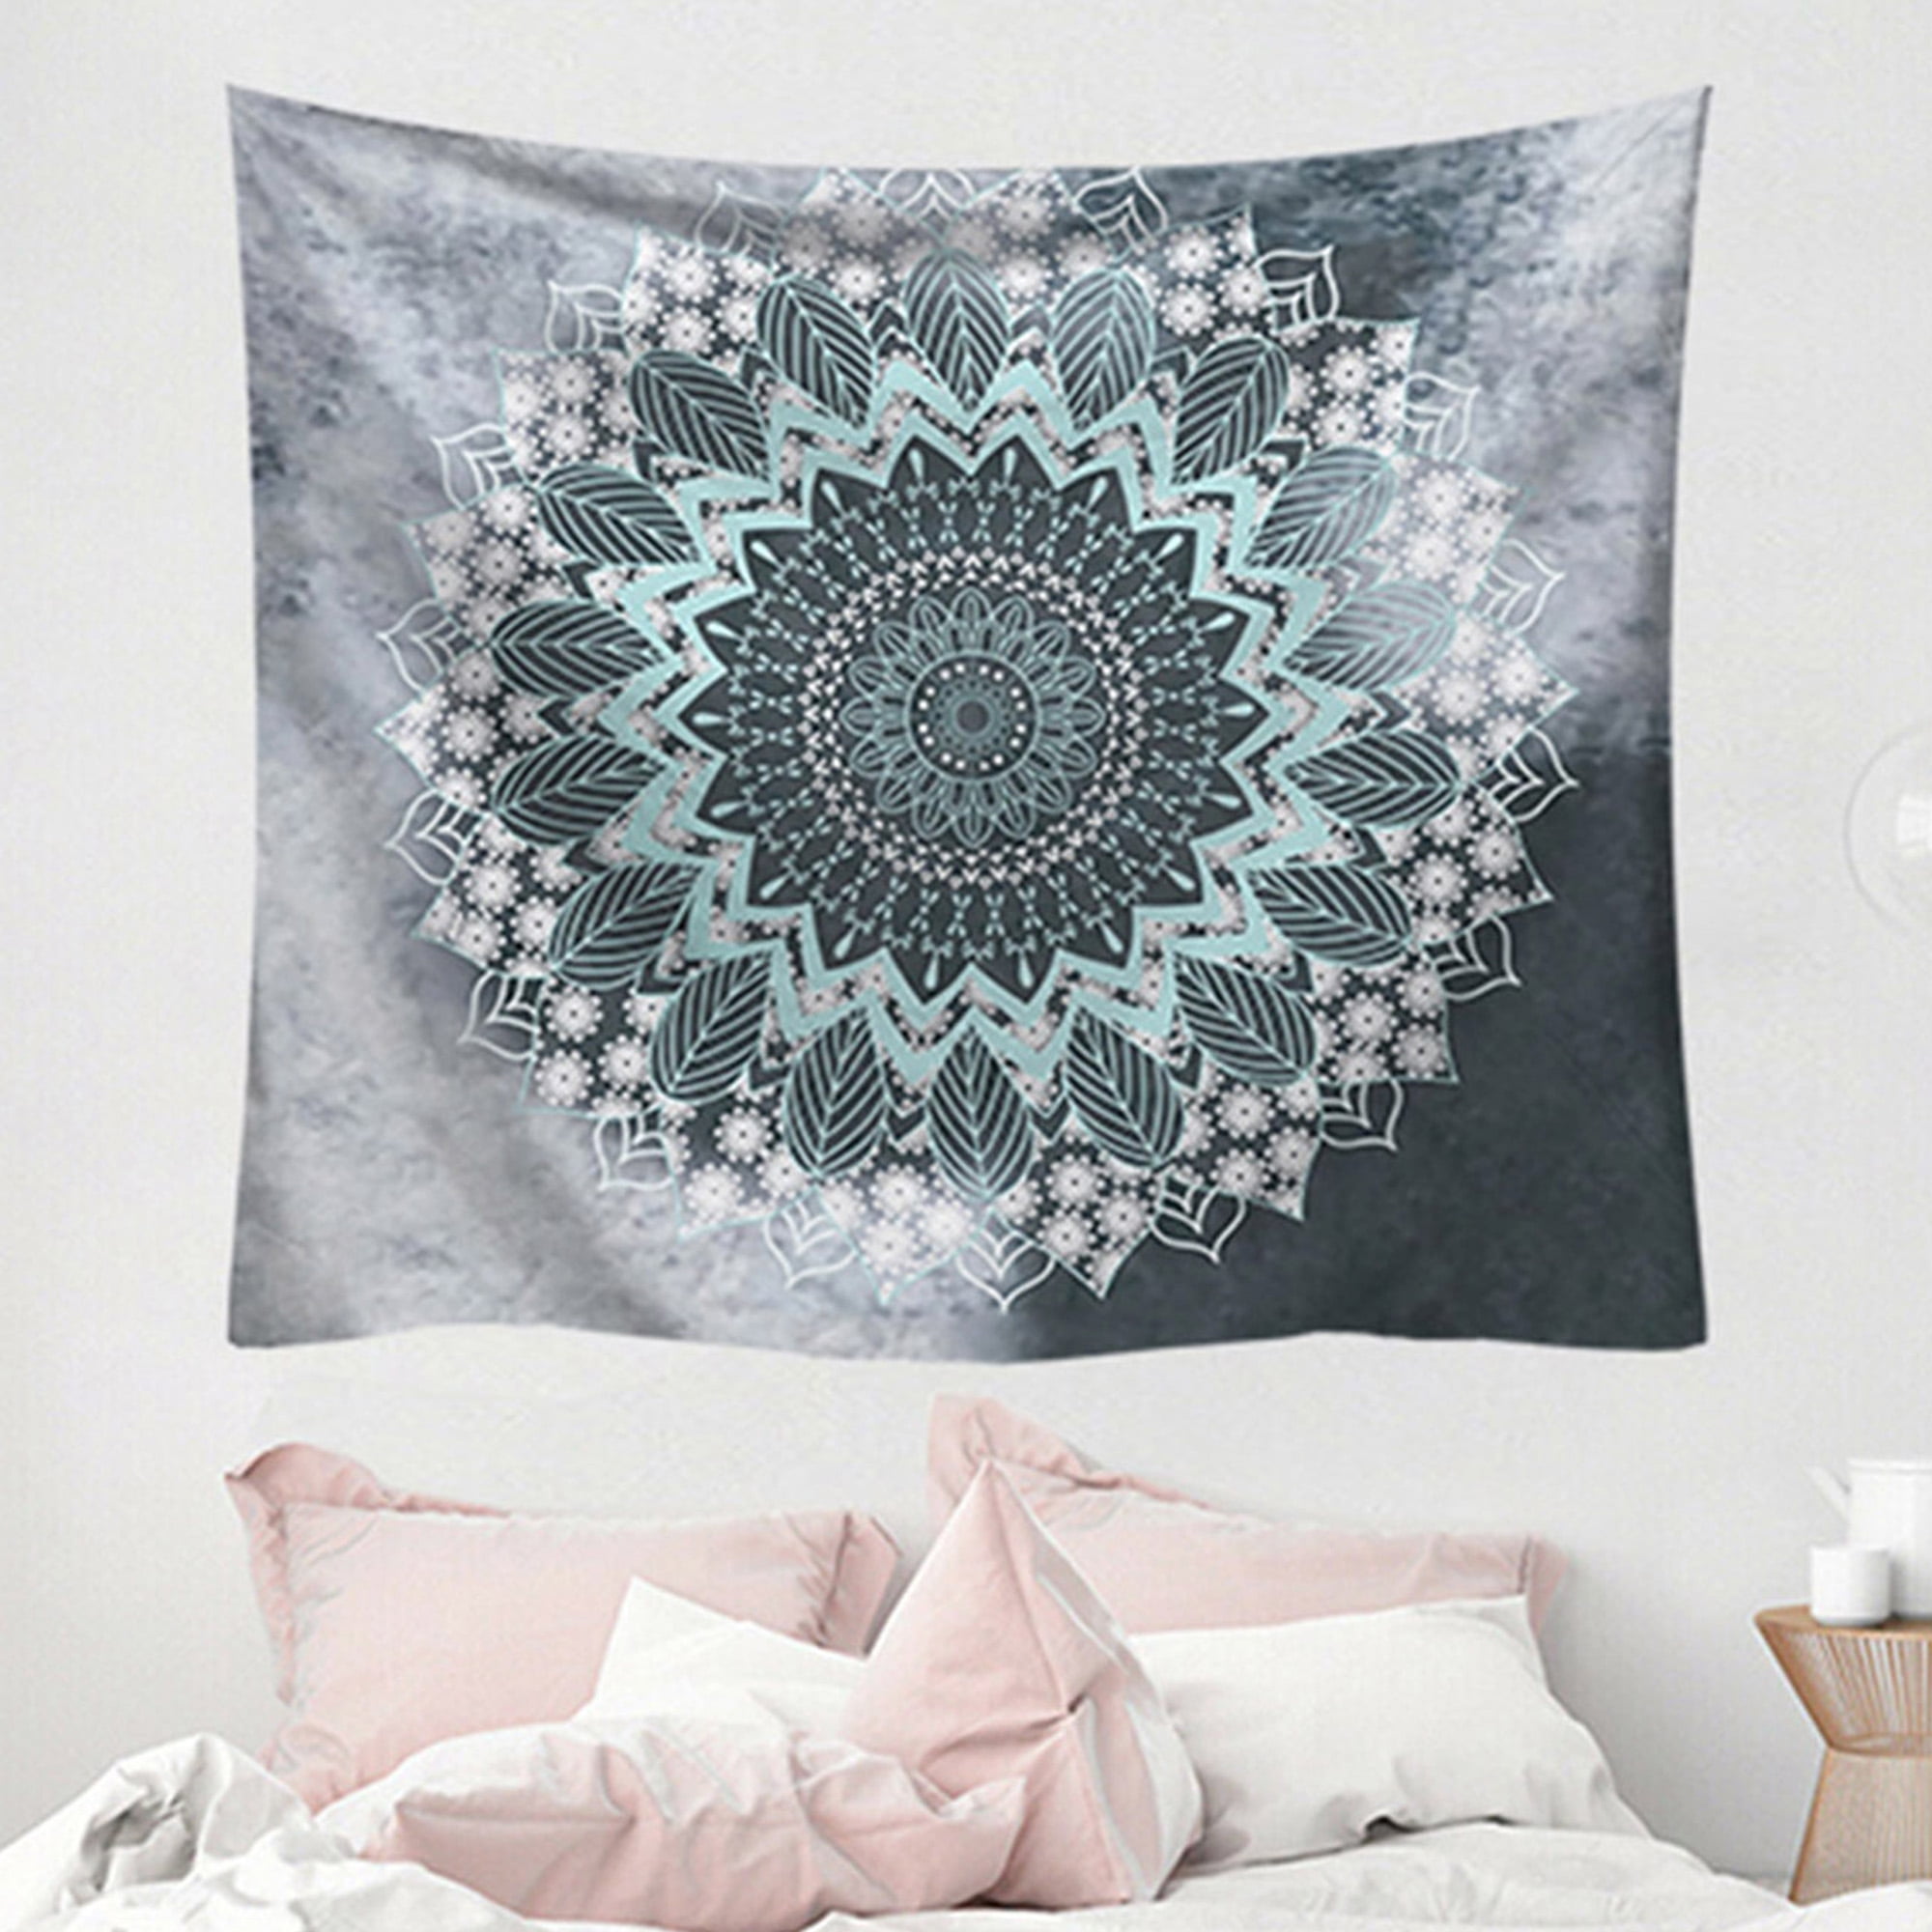 Ombre Mandala Twin Indian Tapestry Hippie Wall Hanging Bohemian Decorative Throw 